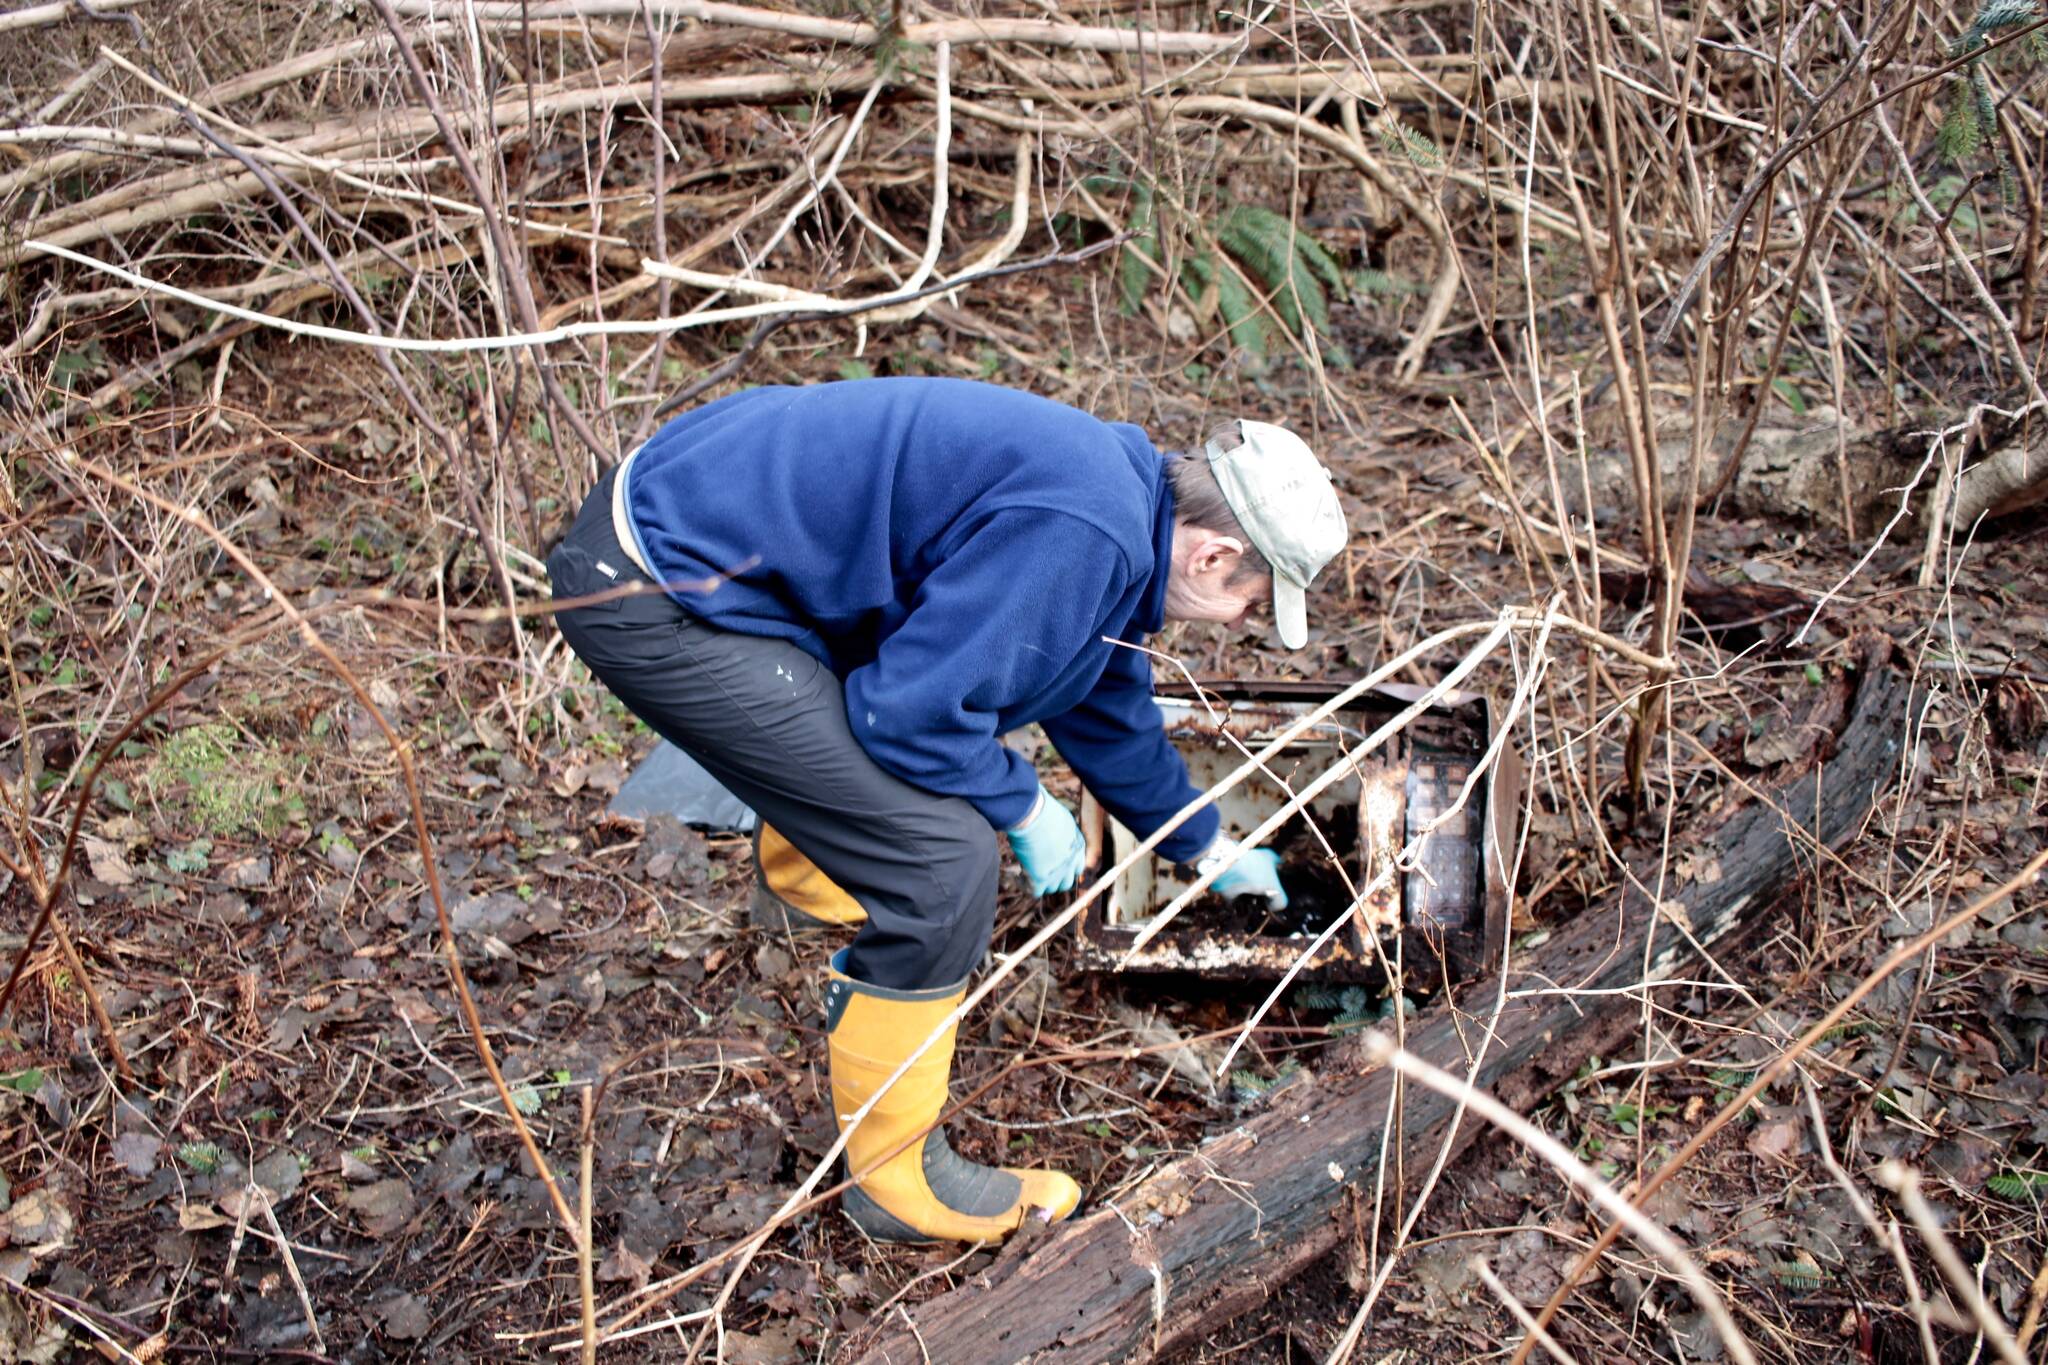 28131966_web1_220201-CRM-Streamkeepers-Bears-CLEANUP_4